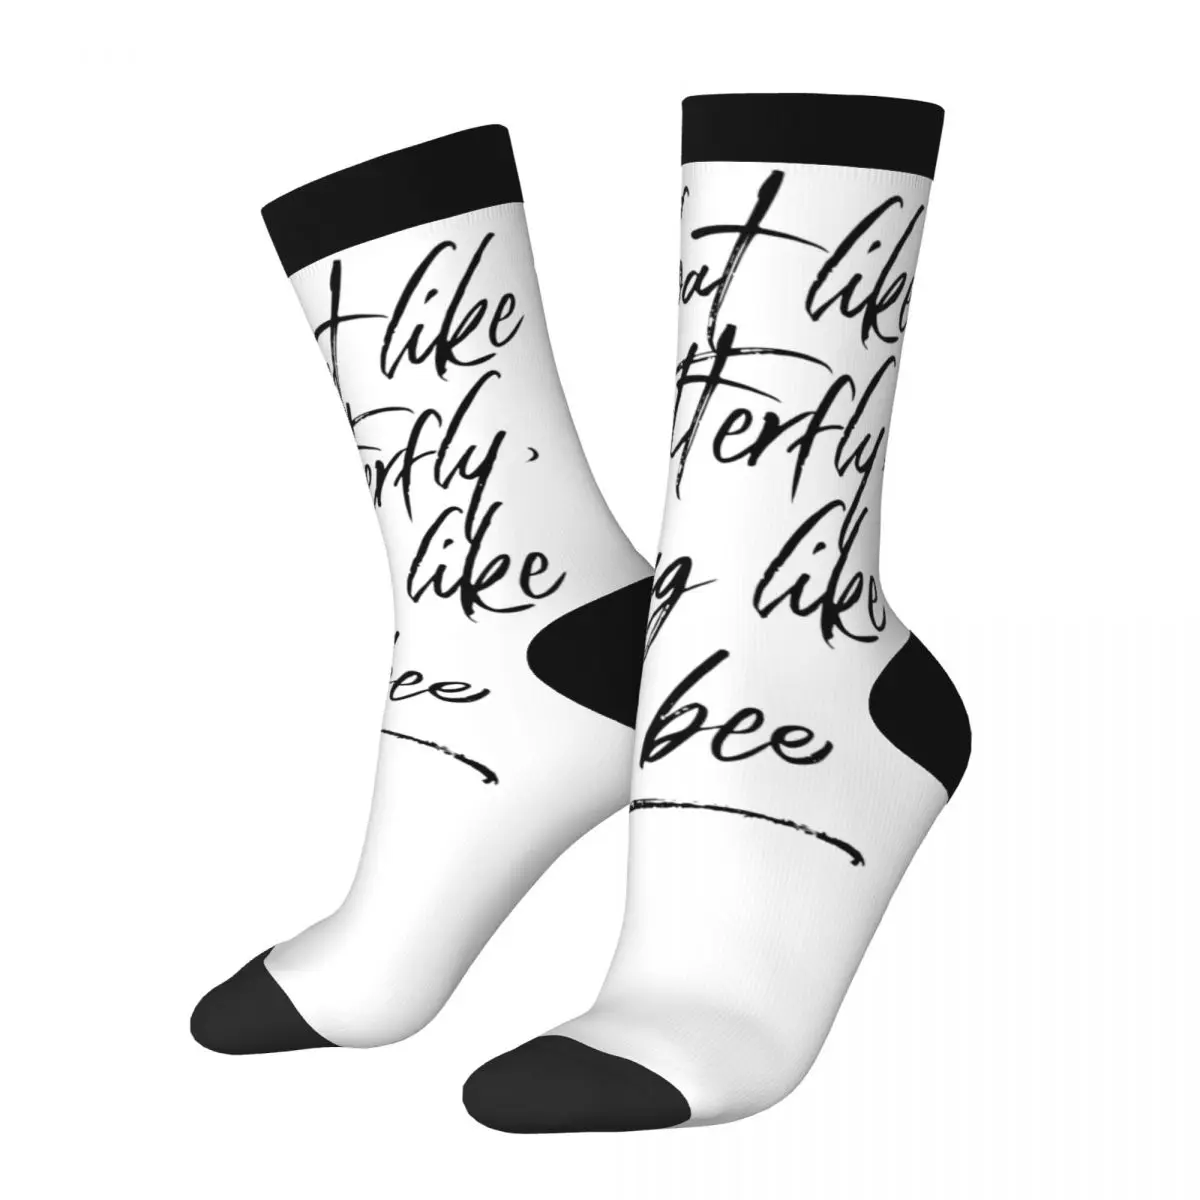 

Muhammads And Alis 1 US USA America (1) Creative BEST TO BUY Funny Joke Contrast color Compression Socks